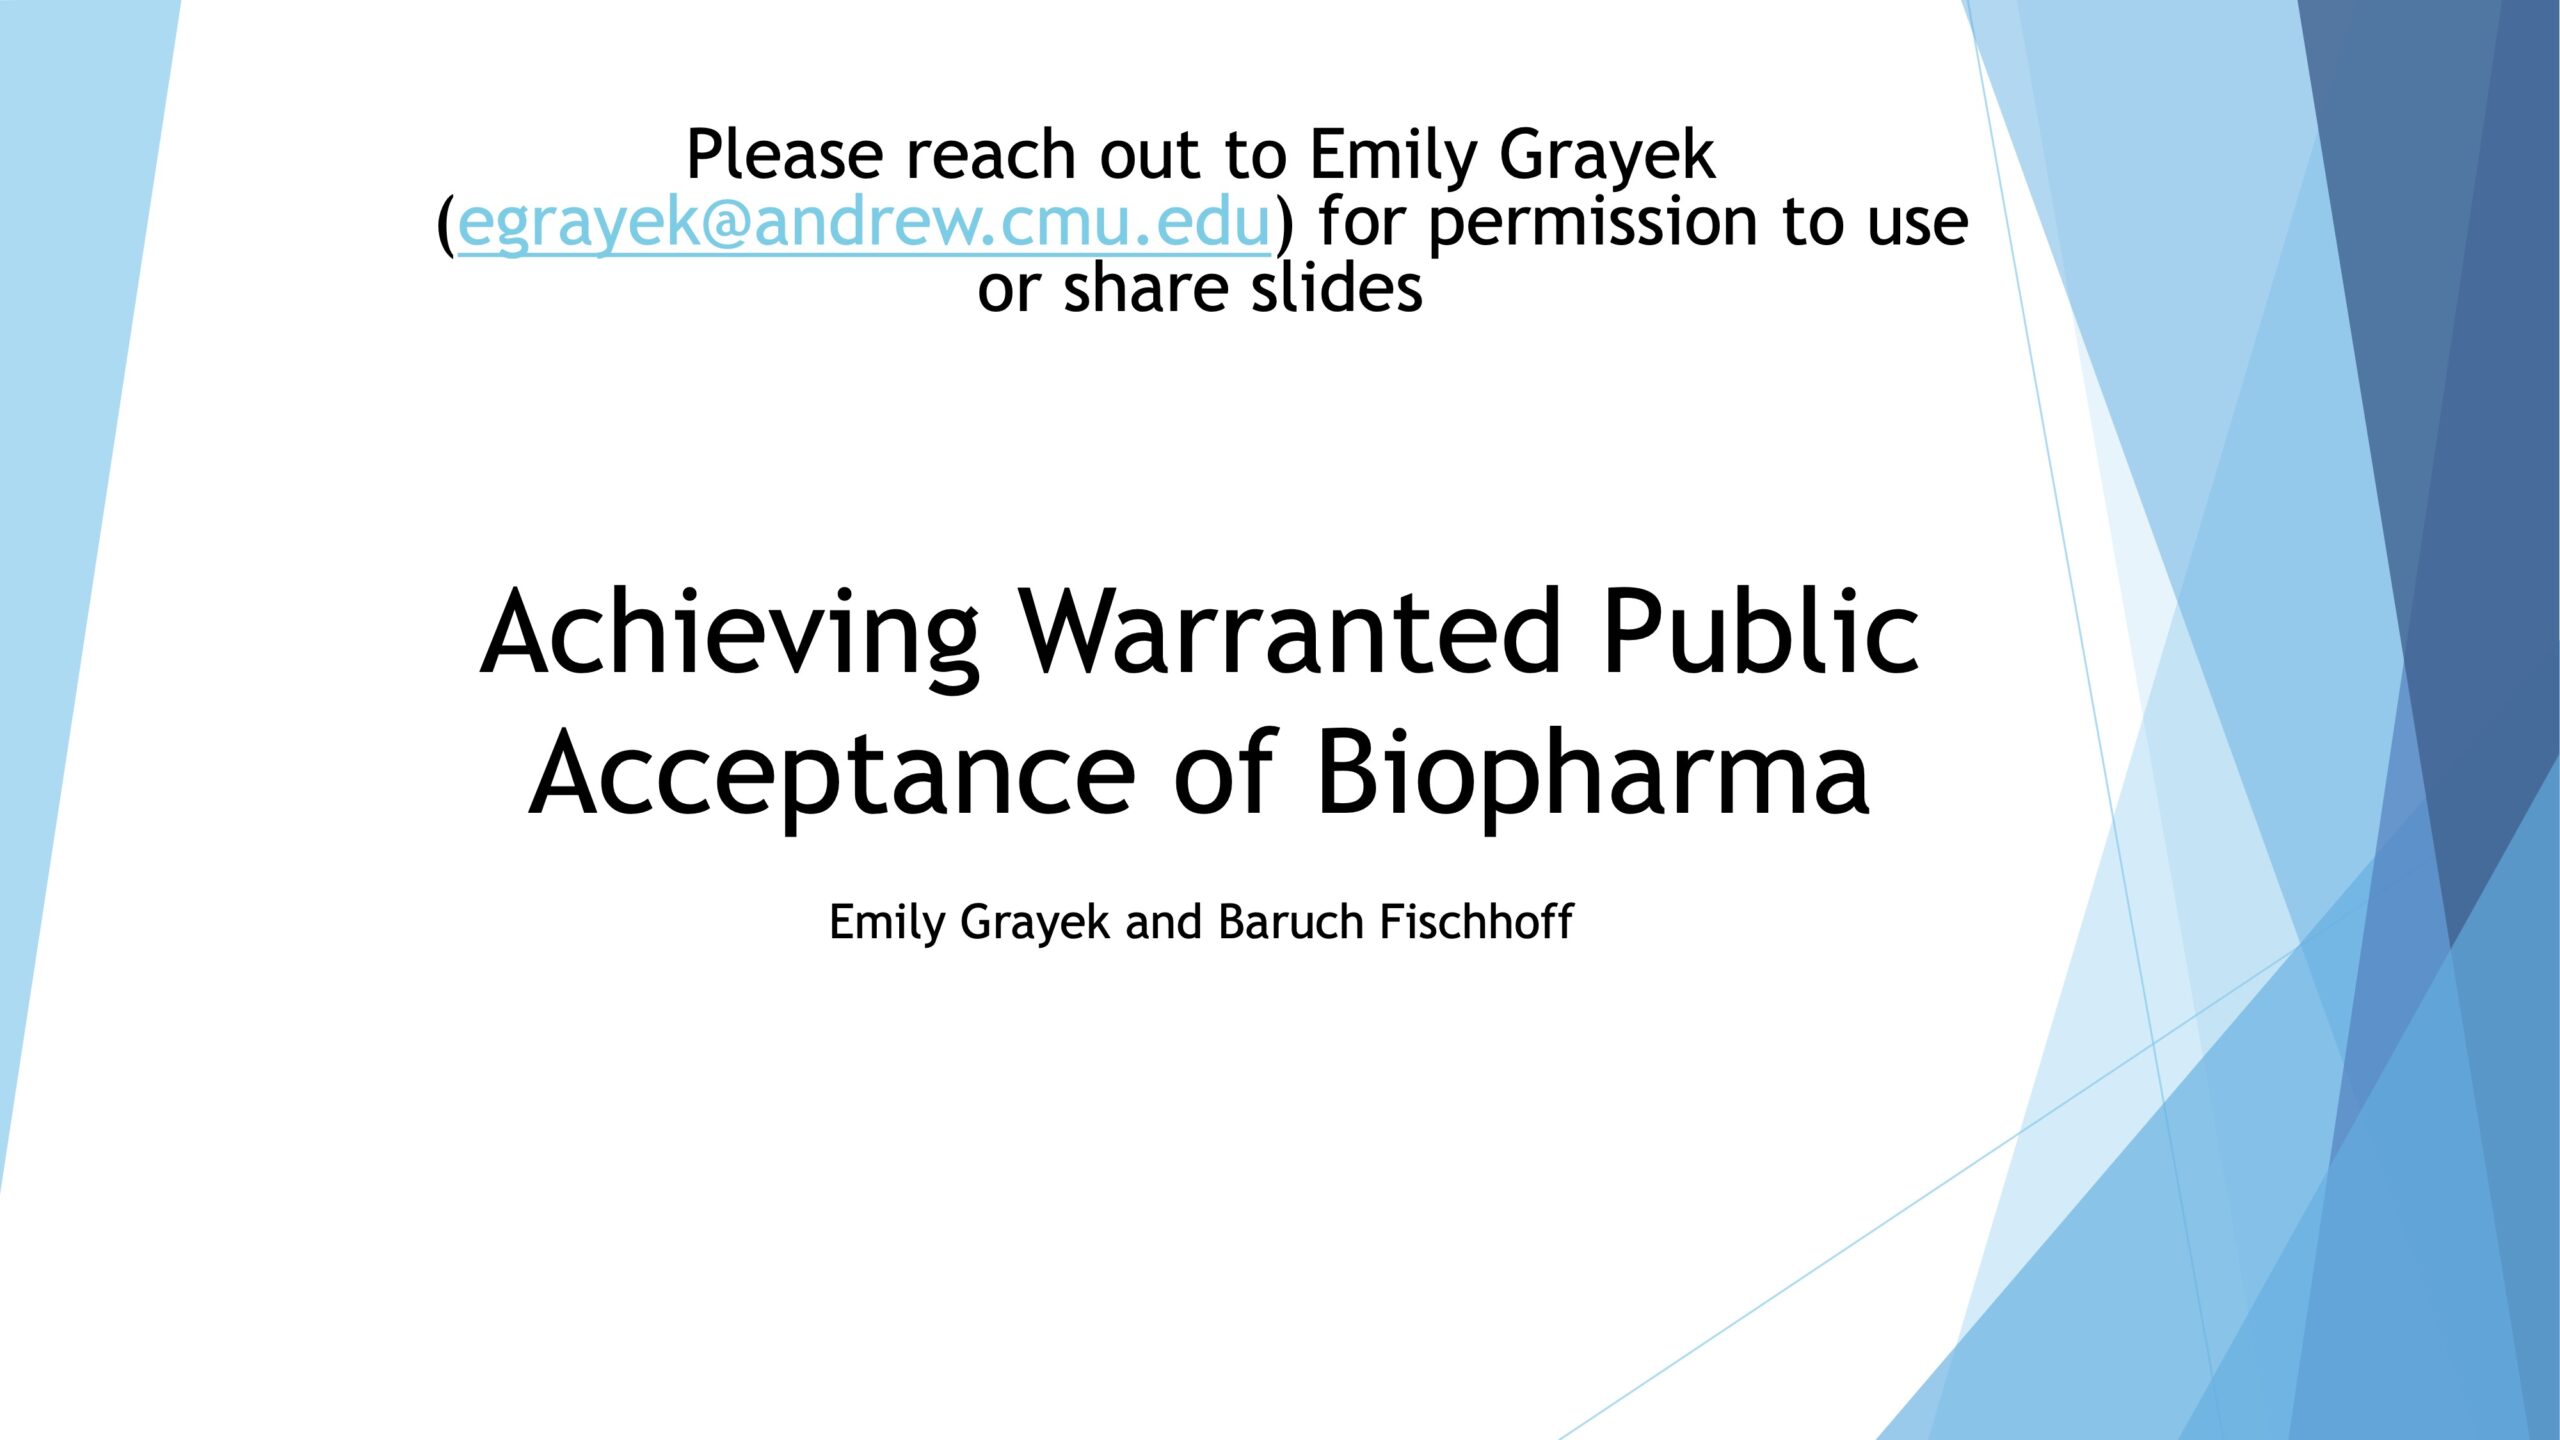 Achieving Warranted Public Acceptance of Biopharma Innovations